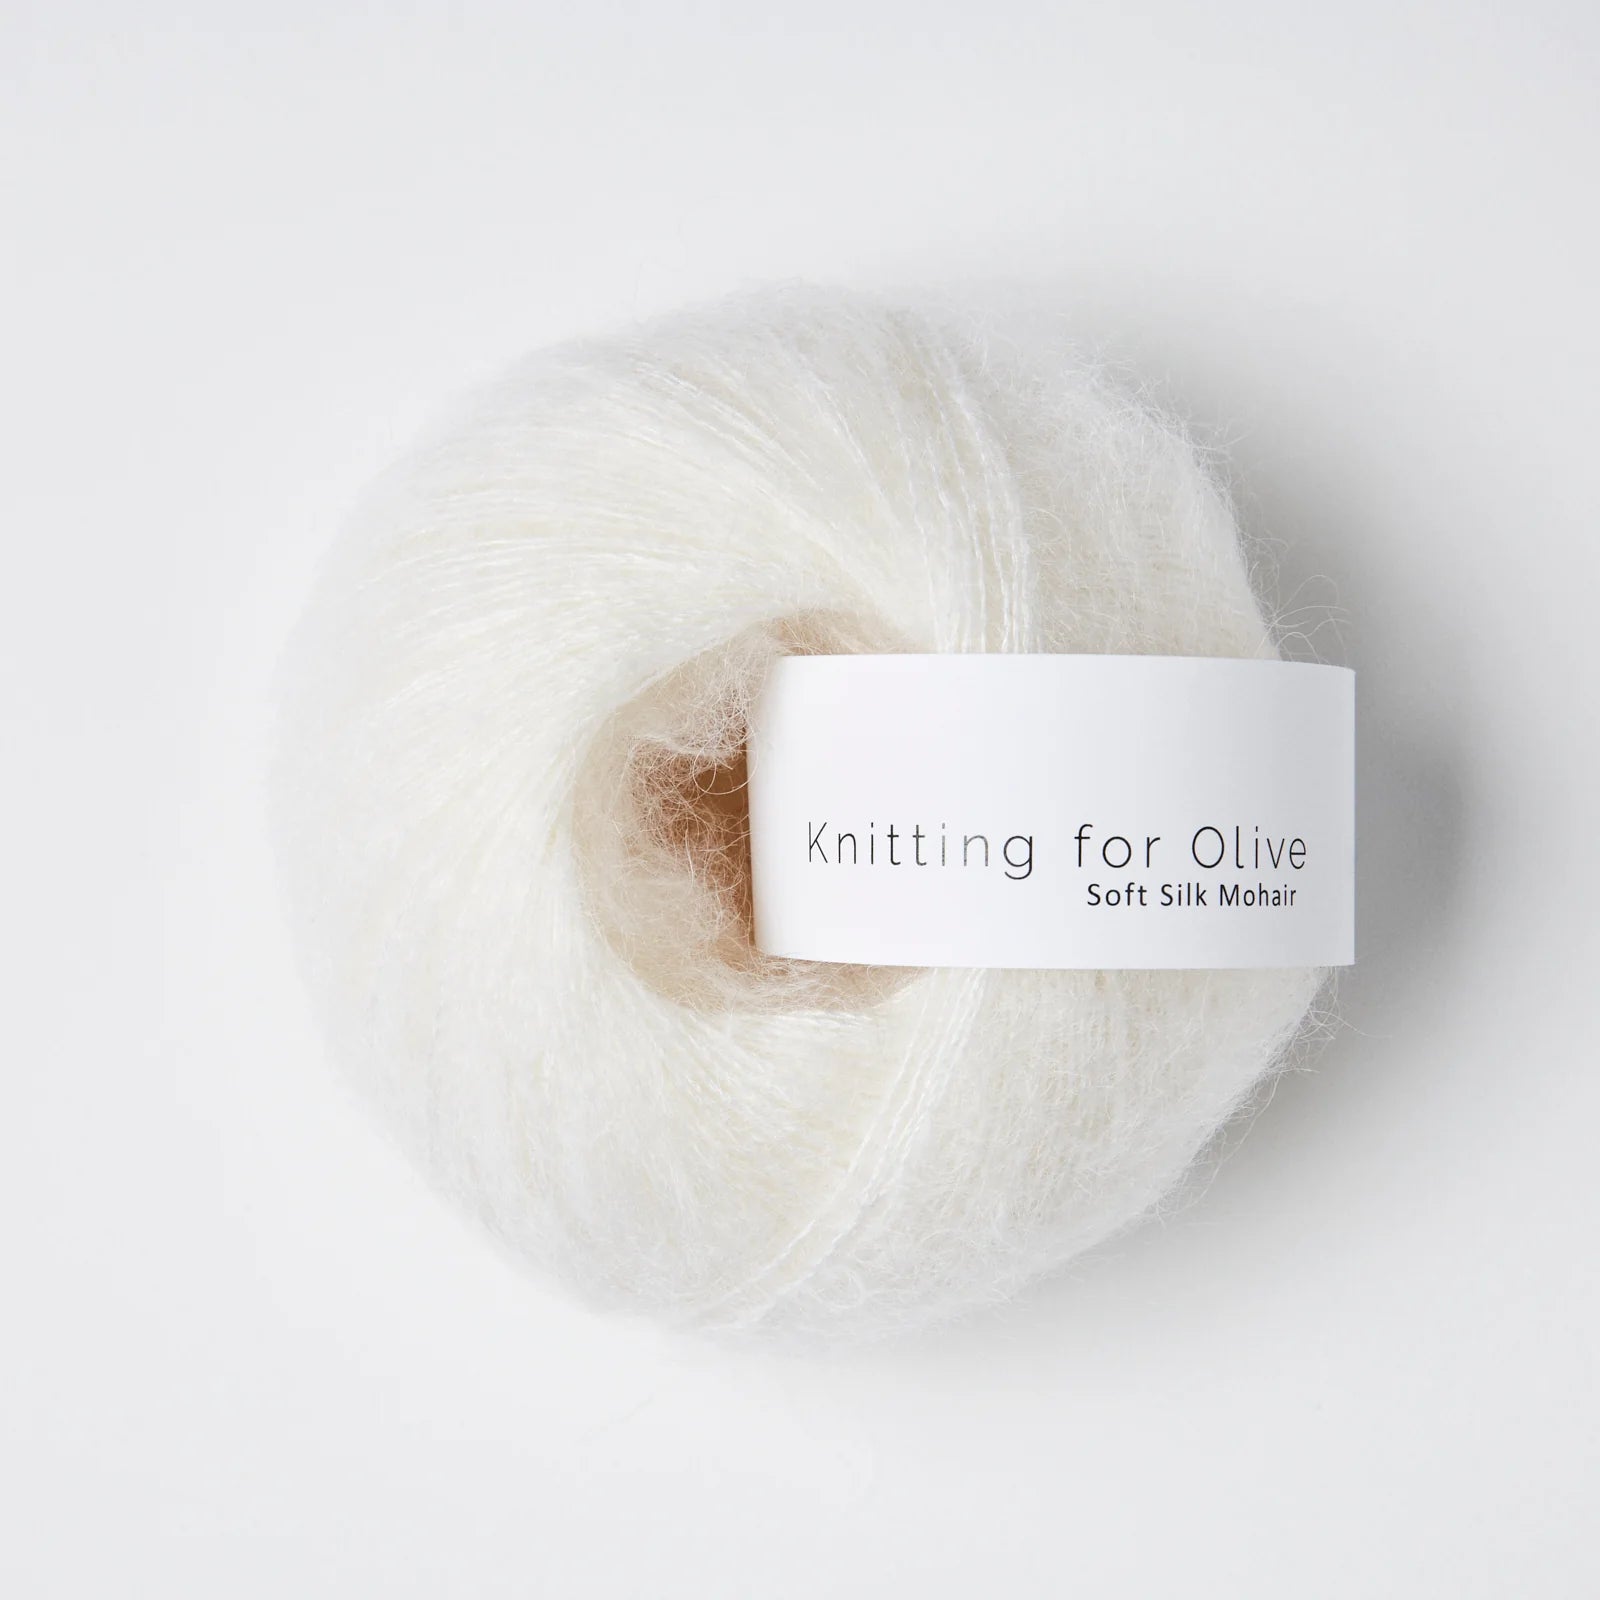 Knitting for Olive Soft Silk Mohair - Knitting for Olive - Snowflake - The Little Yarn Store